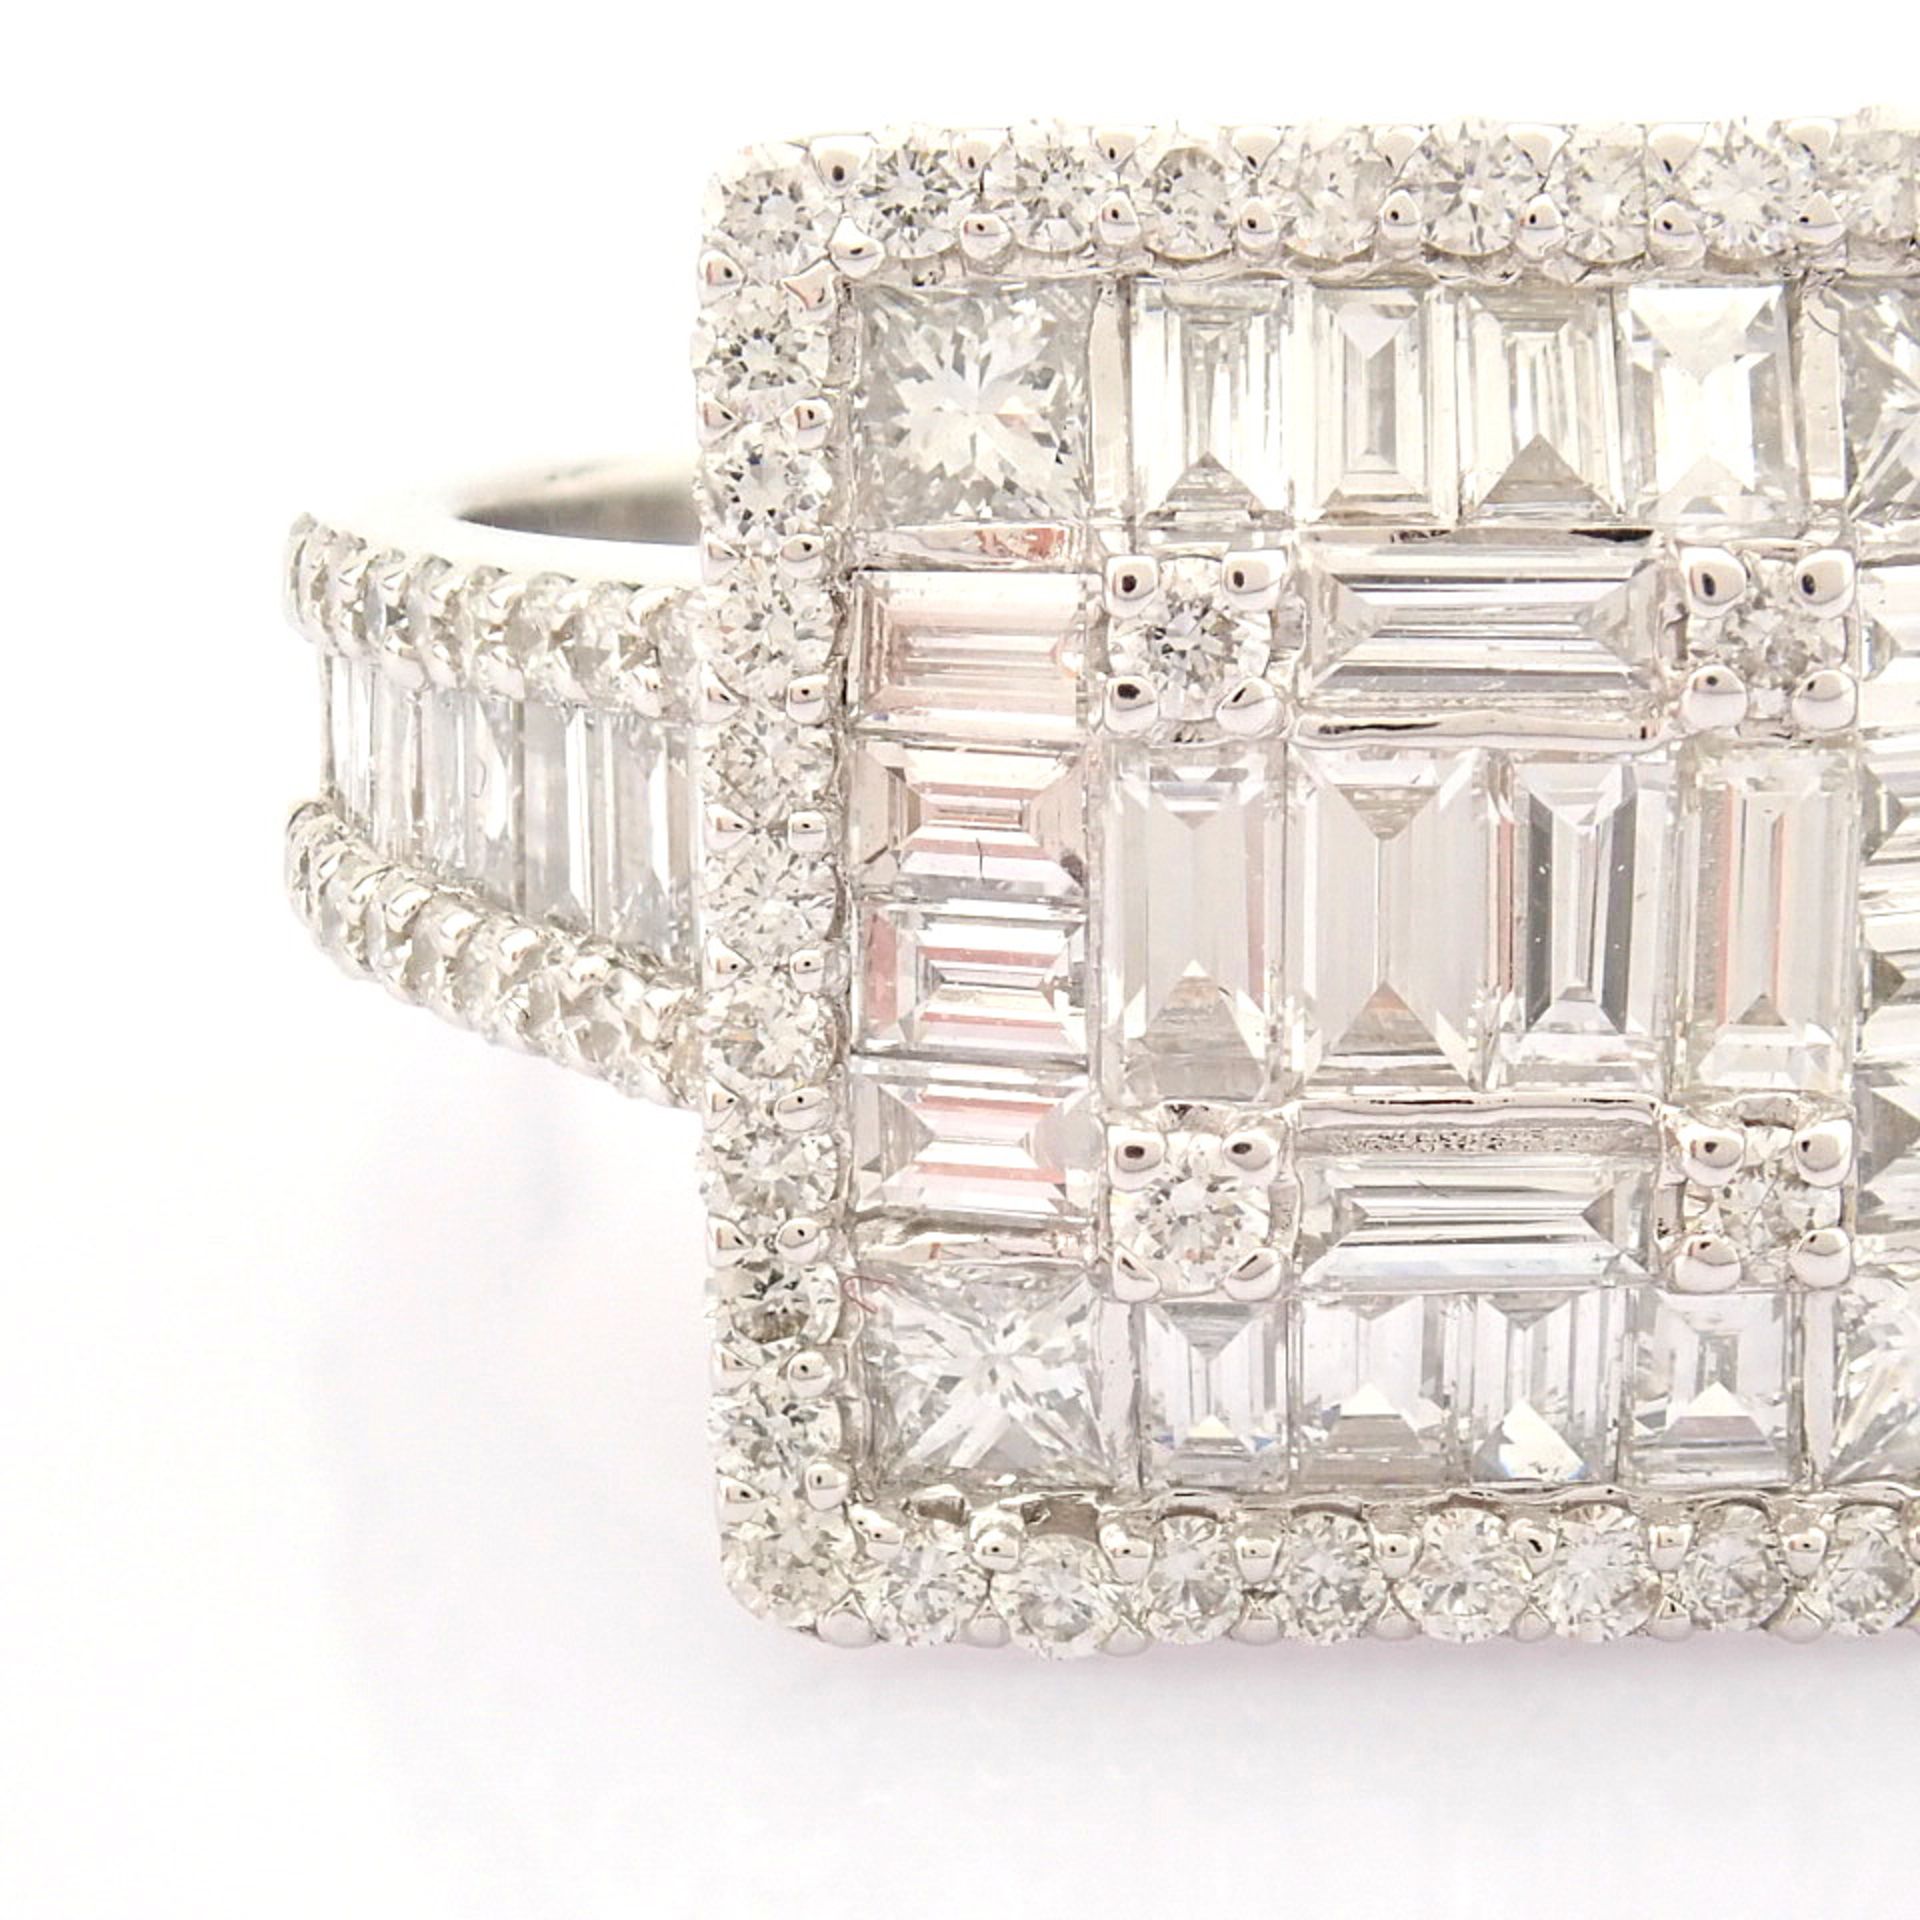 Certificated 14K White Gold Baguette Diamond & Diamond Ring (Total 1.38 ct Stone) - Image 5 of 12